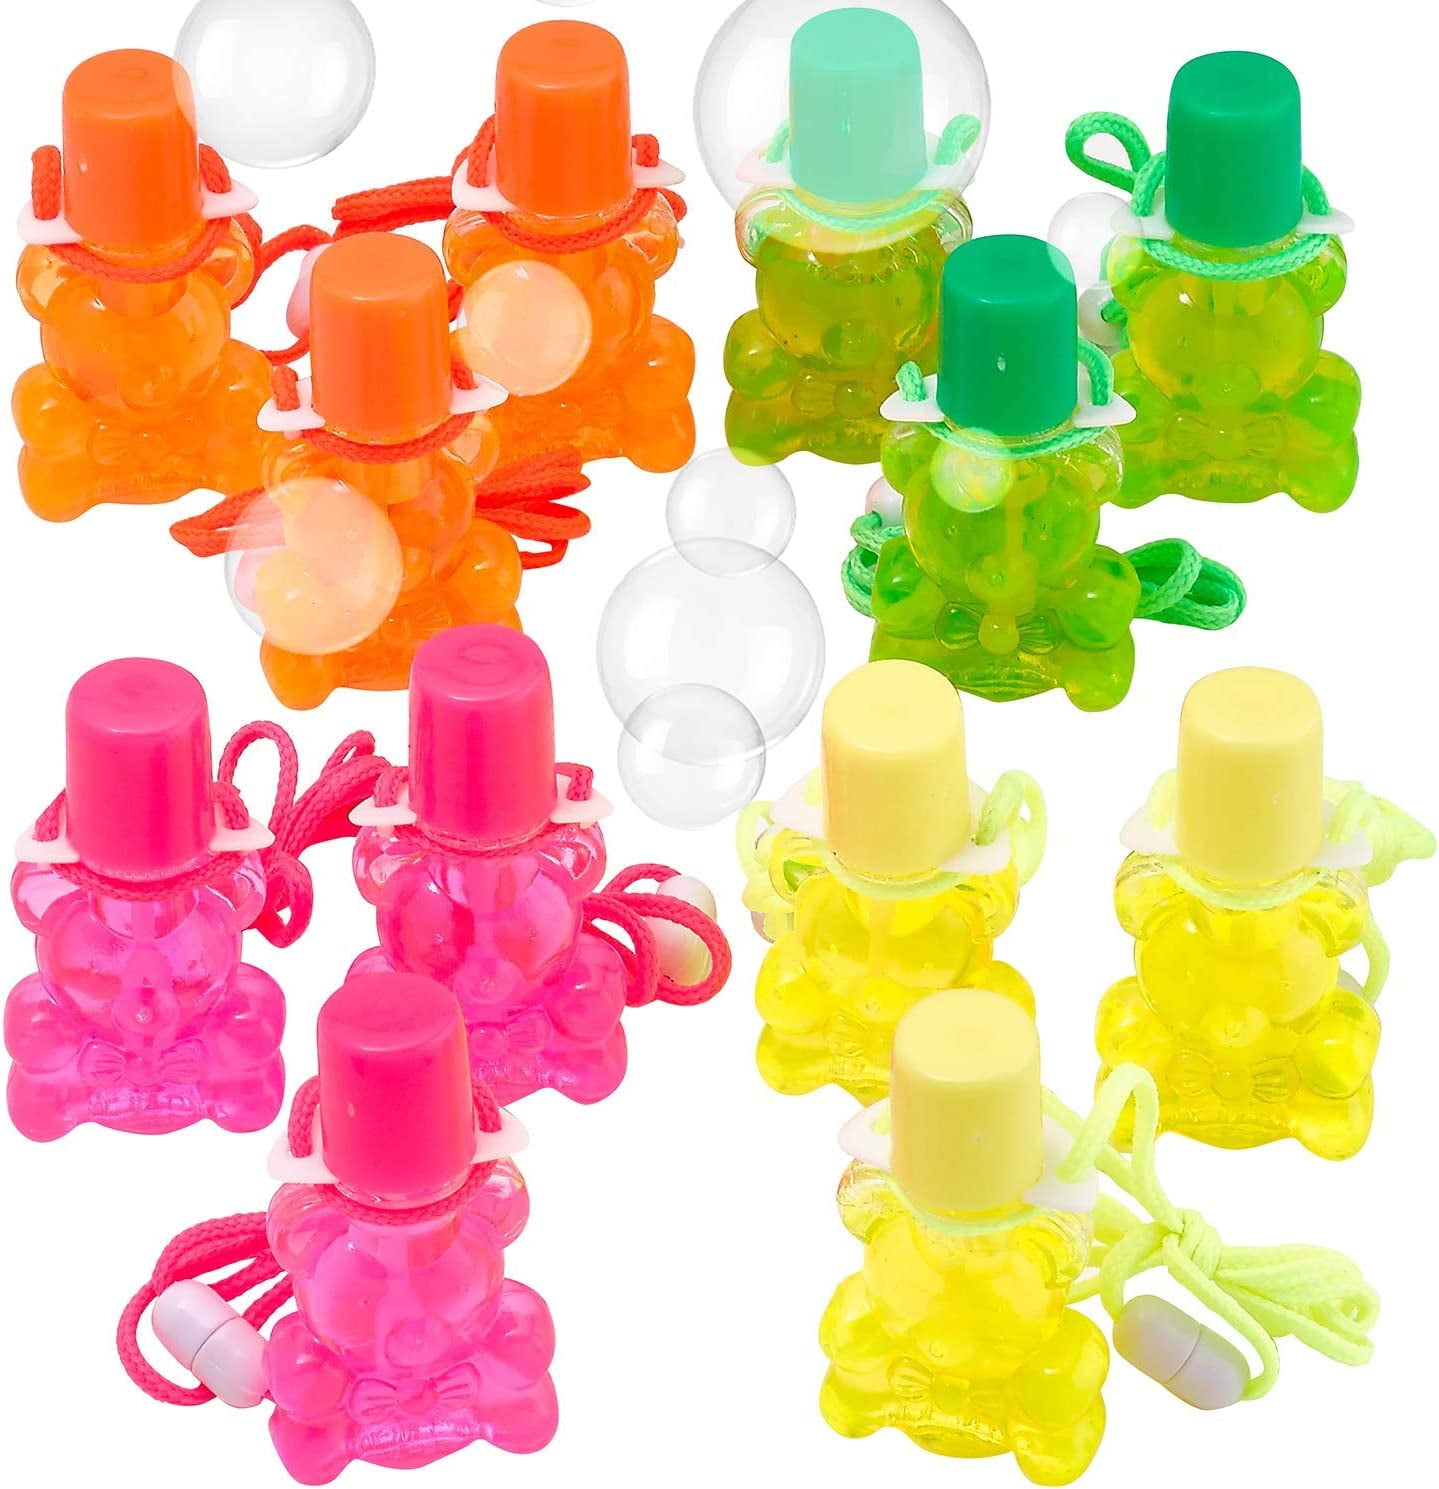 24 PC Train Shaped Bubble Blower with Whistle - Dallas General Wholesale